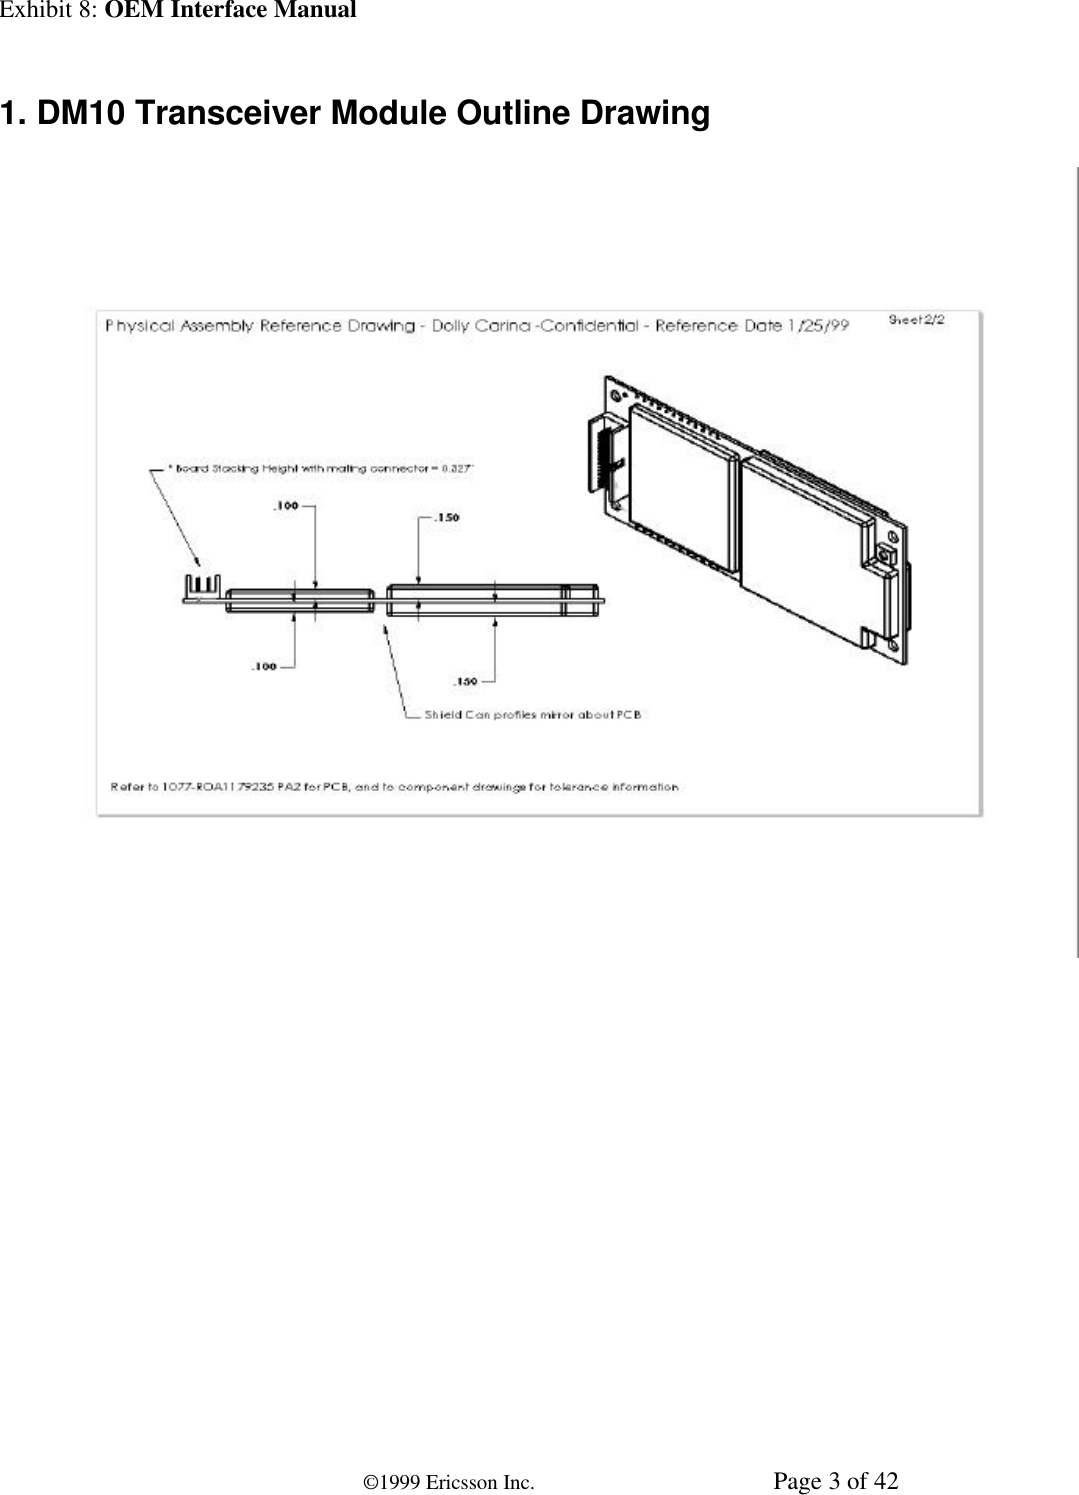 Exhibit 8: OEM Interface Manual©1999 Ericsson Inc. Page 3 of 421. DM10 Transceiver Module Outline Drawing